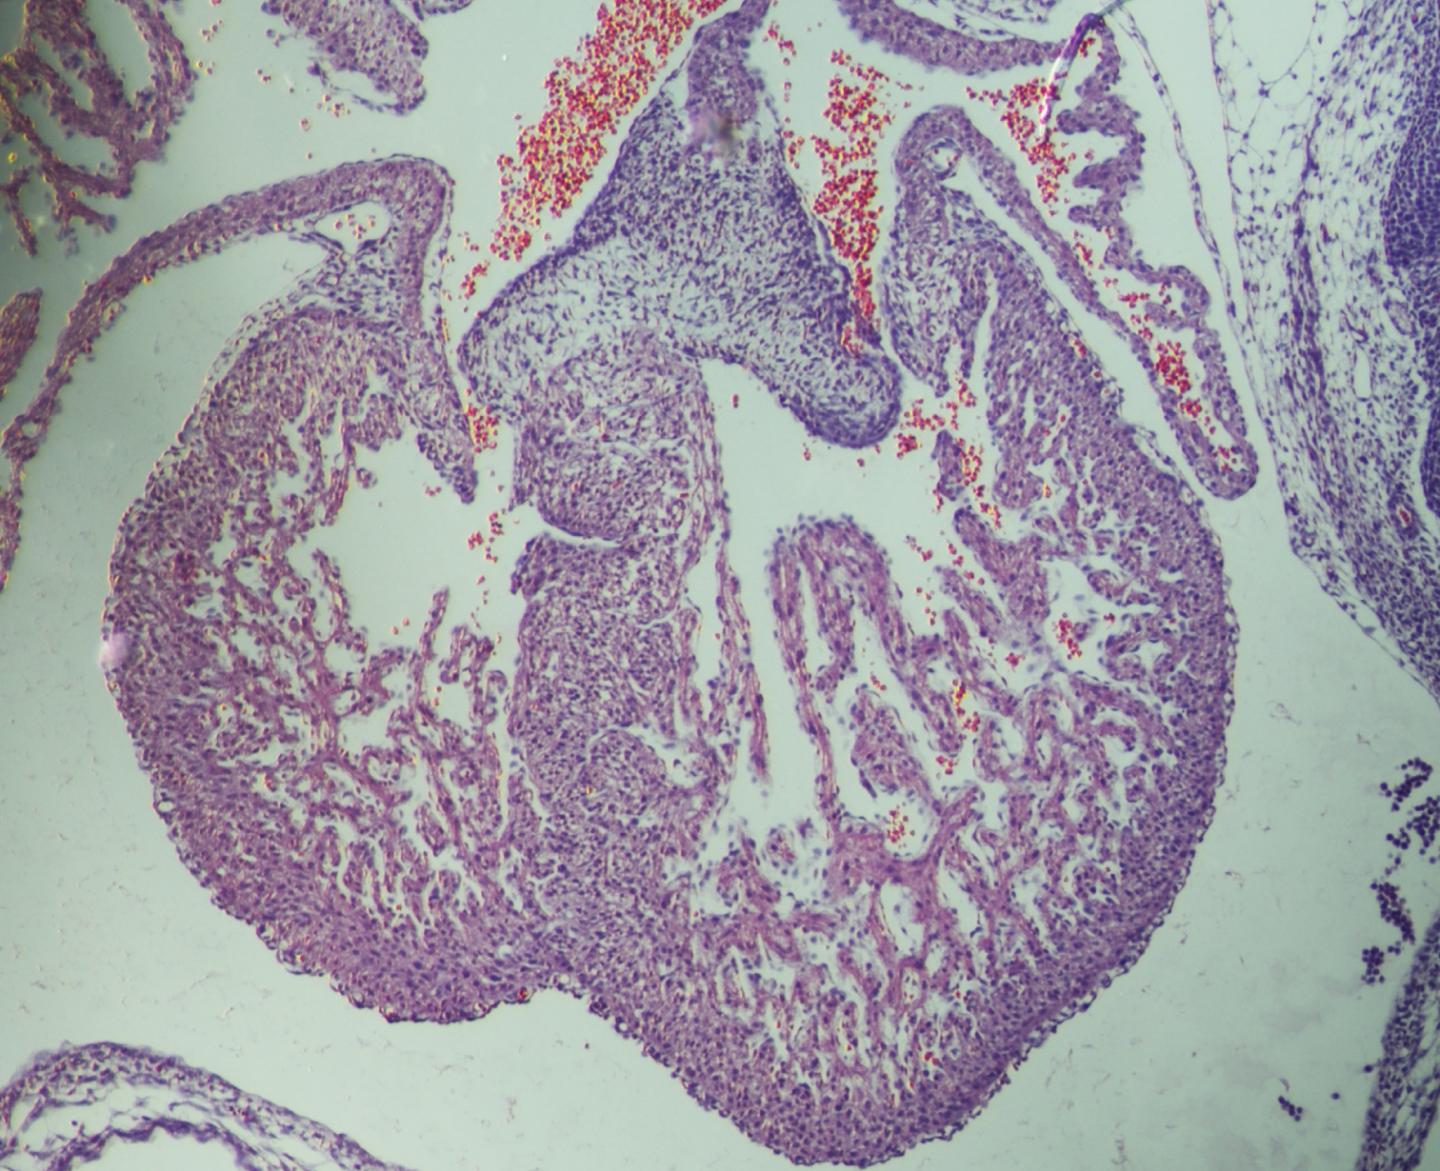 Developing Mouse Heart